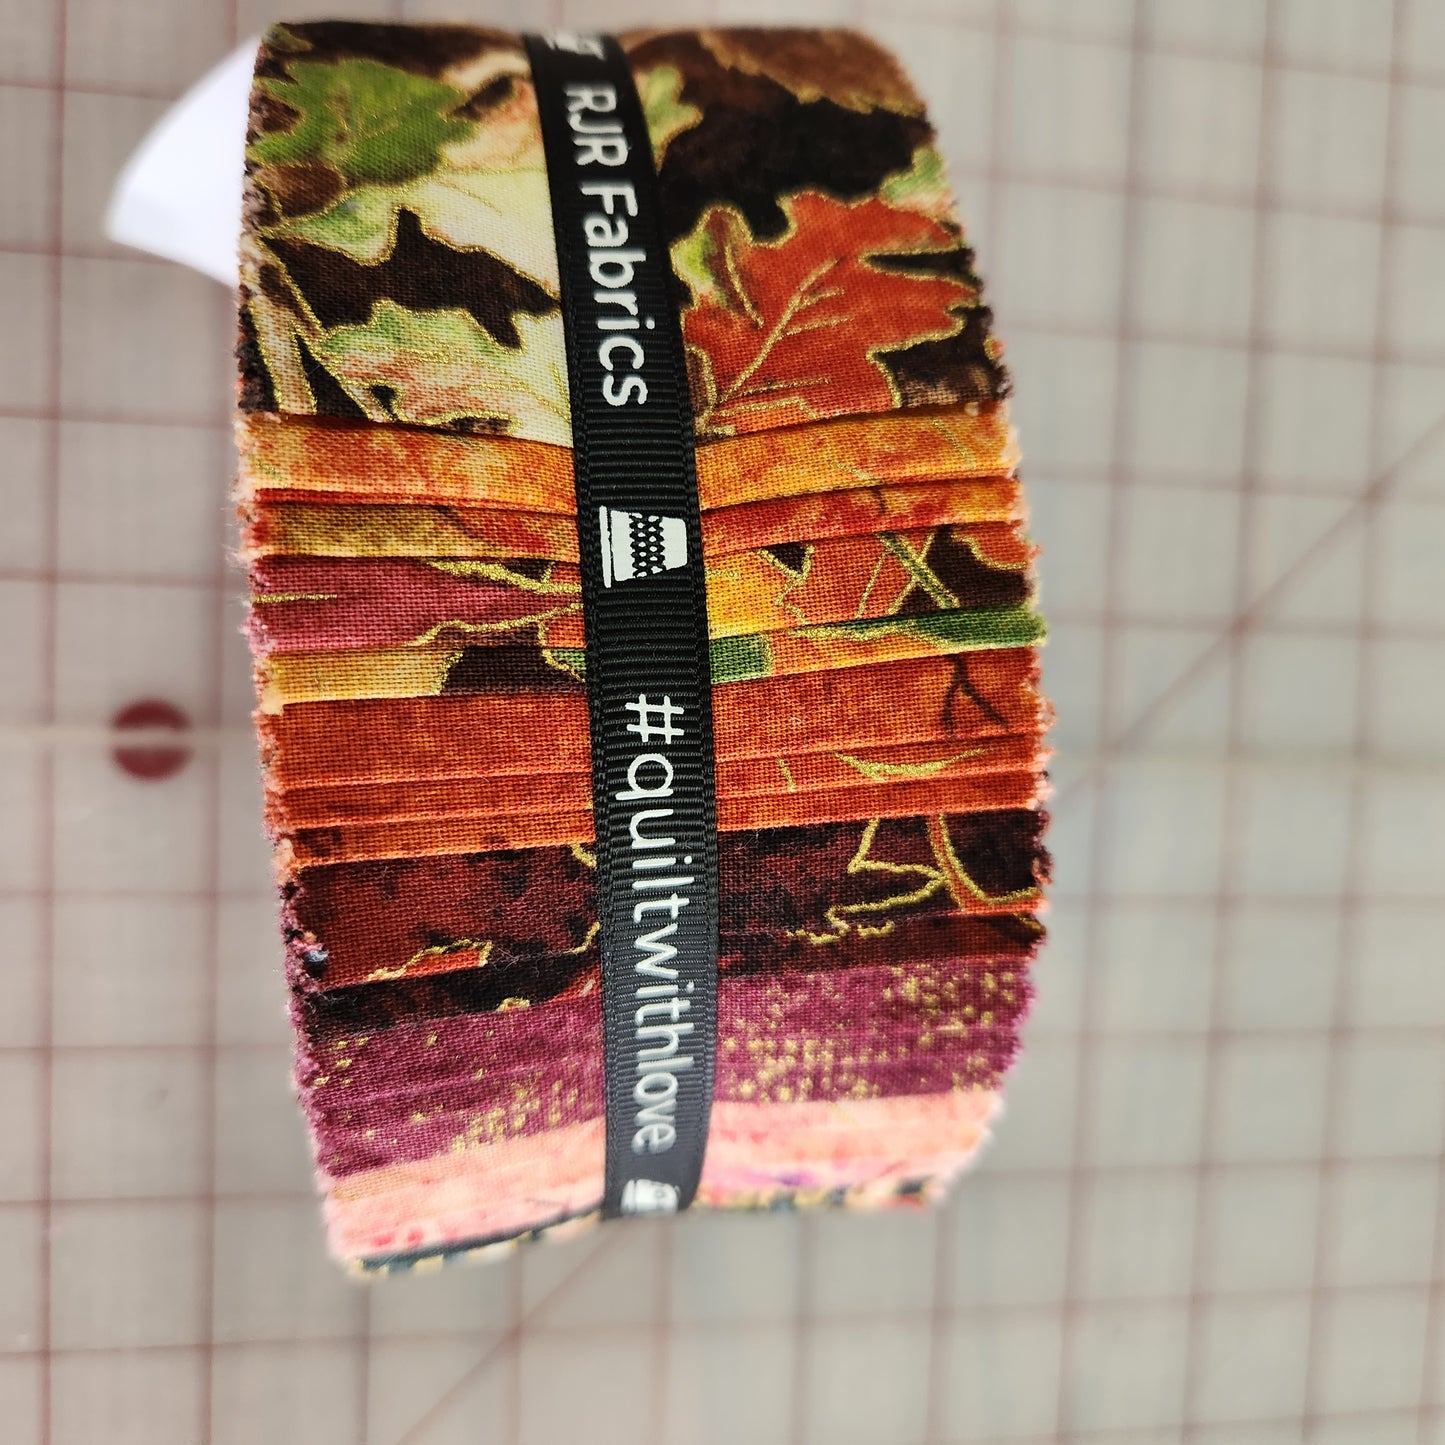 Shades of Autumn Jelly Roll by RJR studio